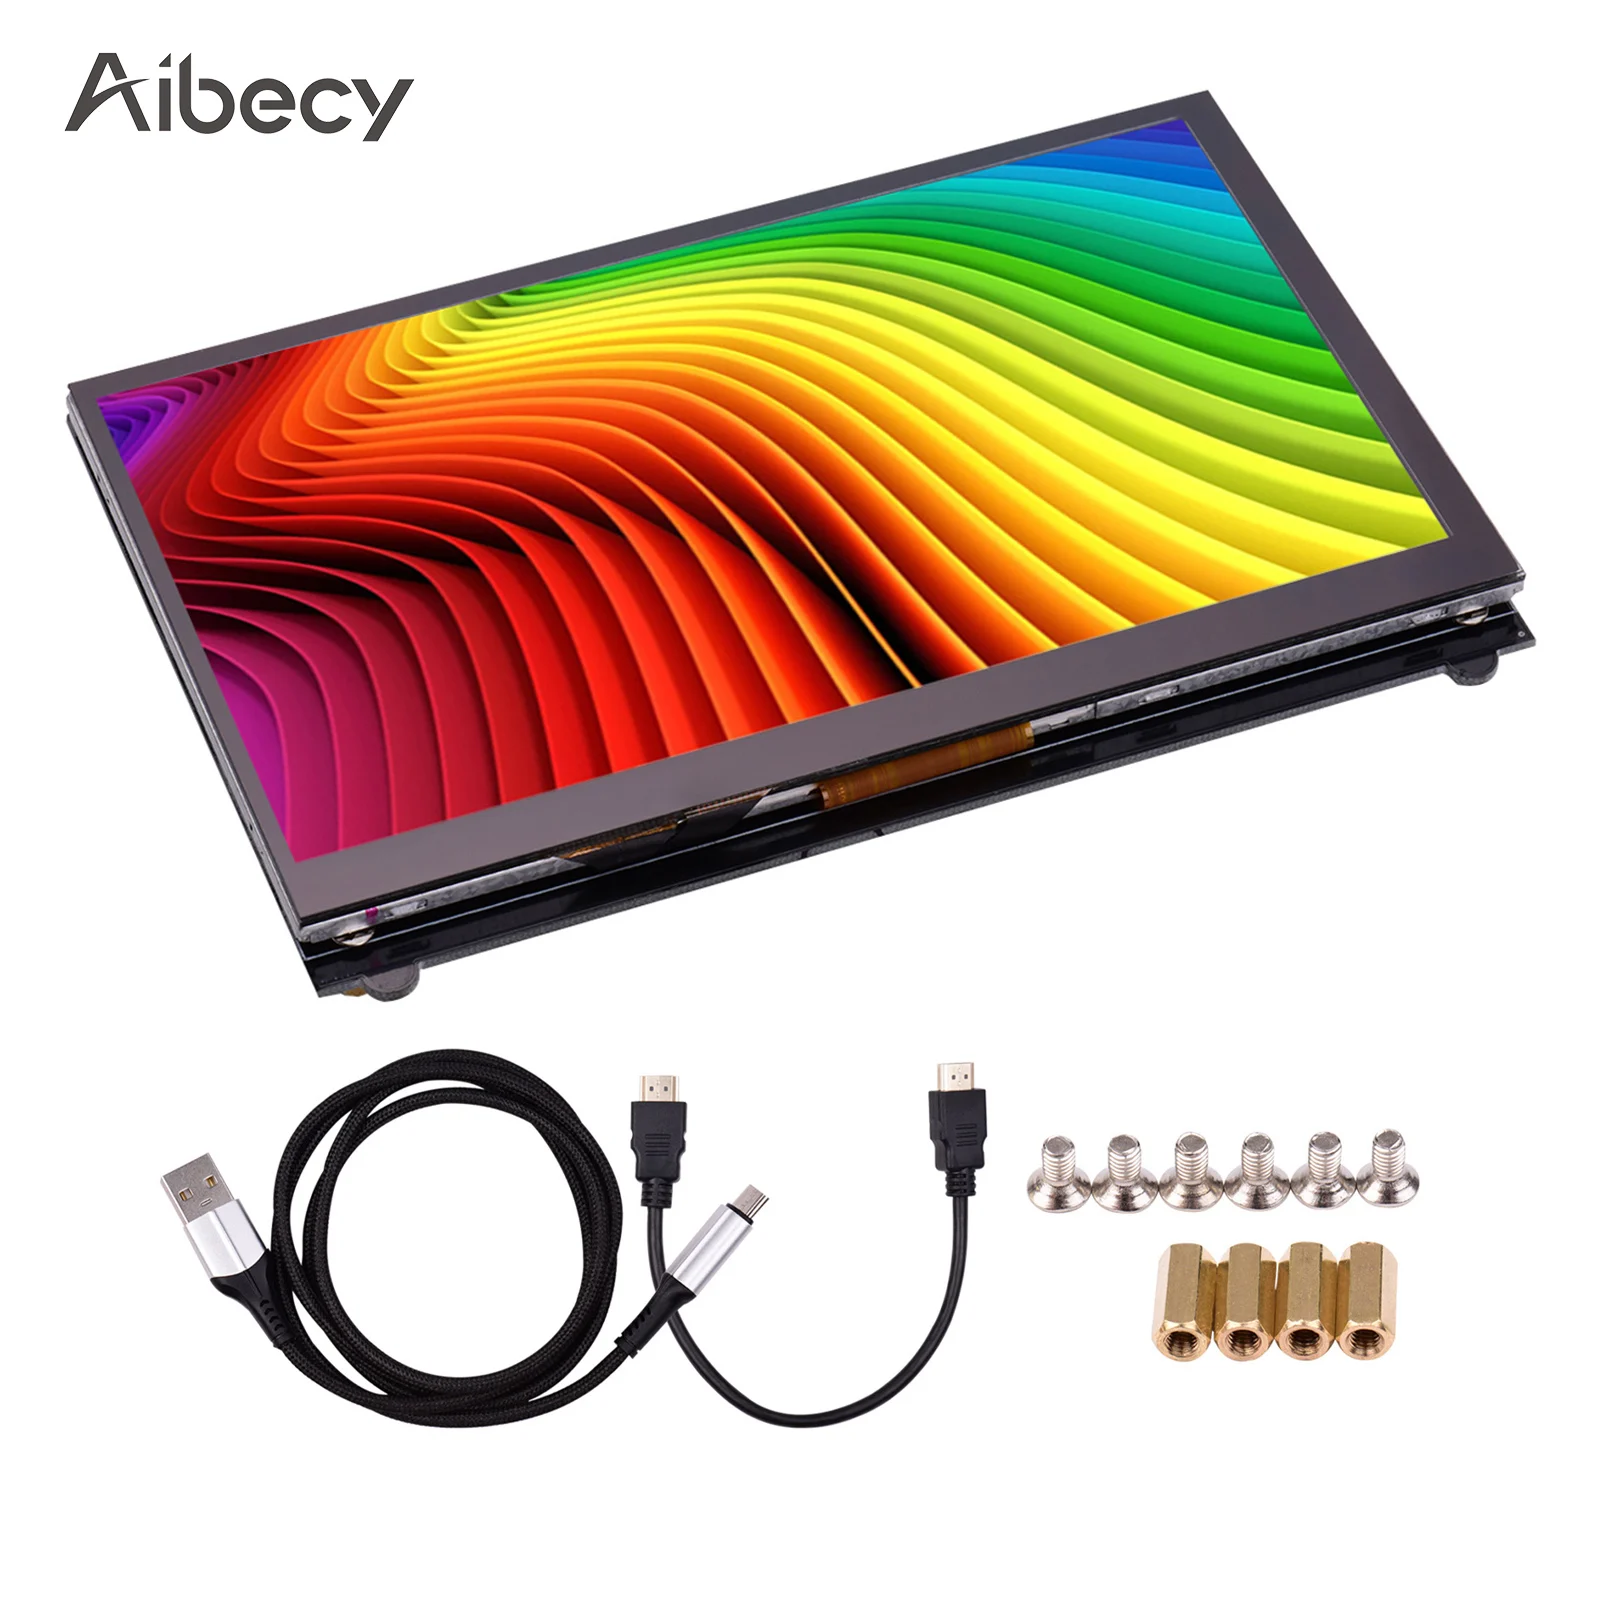 

Aibecy 7 Inch IPS Capacitive Touchscreen Display 1024*600 Resolution Small Portable Monitor with USB Interface Educational Tool